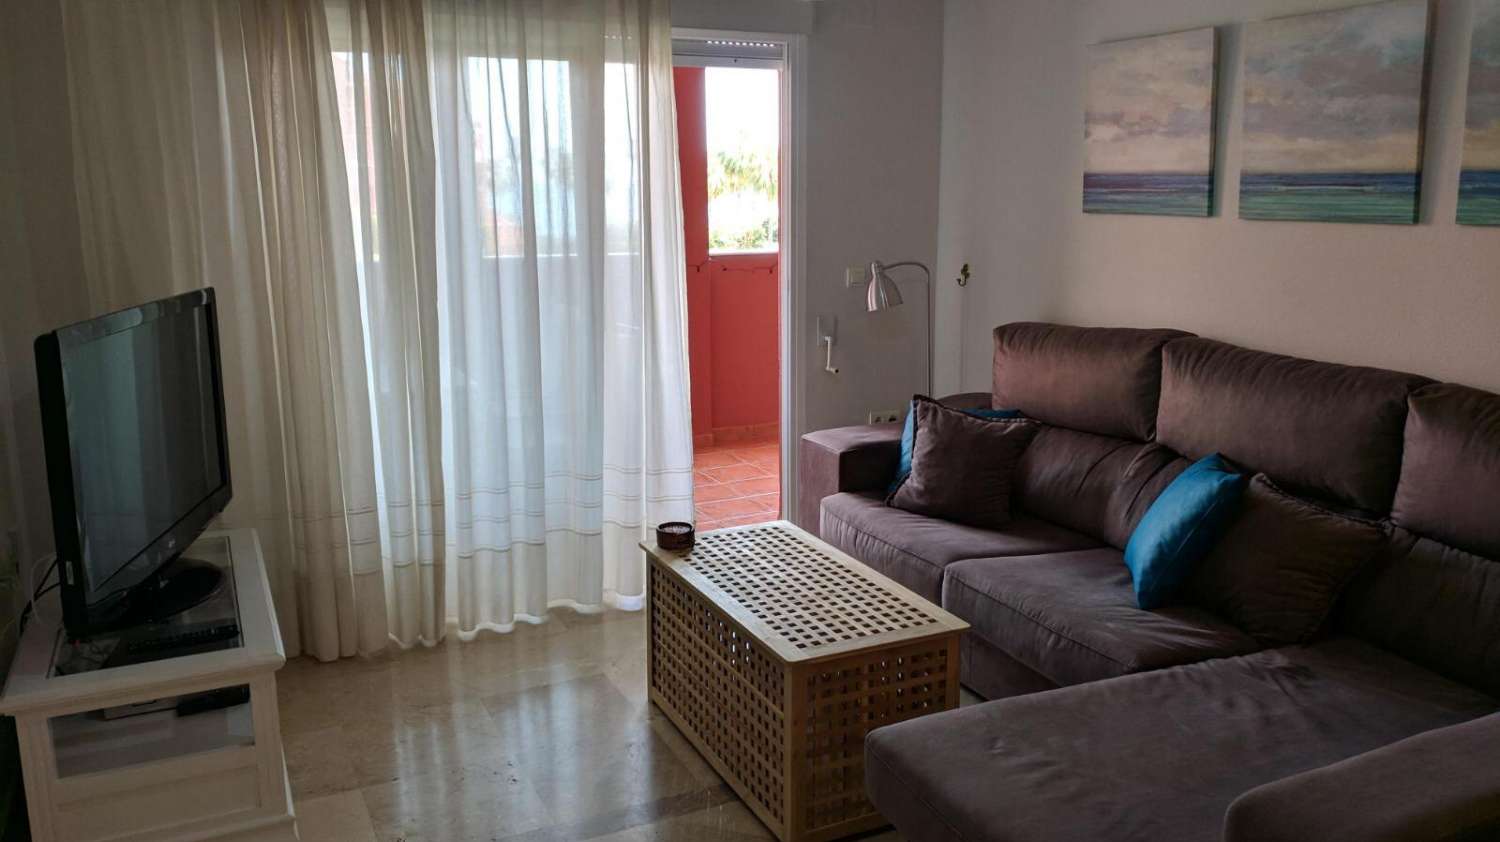 FOR RENT SHORT SEASON BEAUTIFUL APARTMENT WITH SEA VIEWS